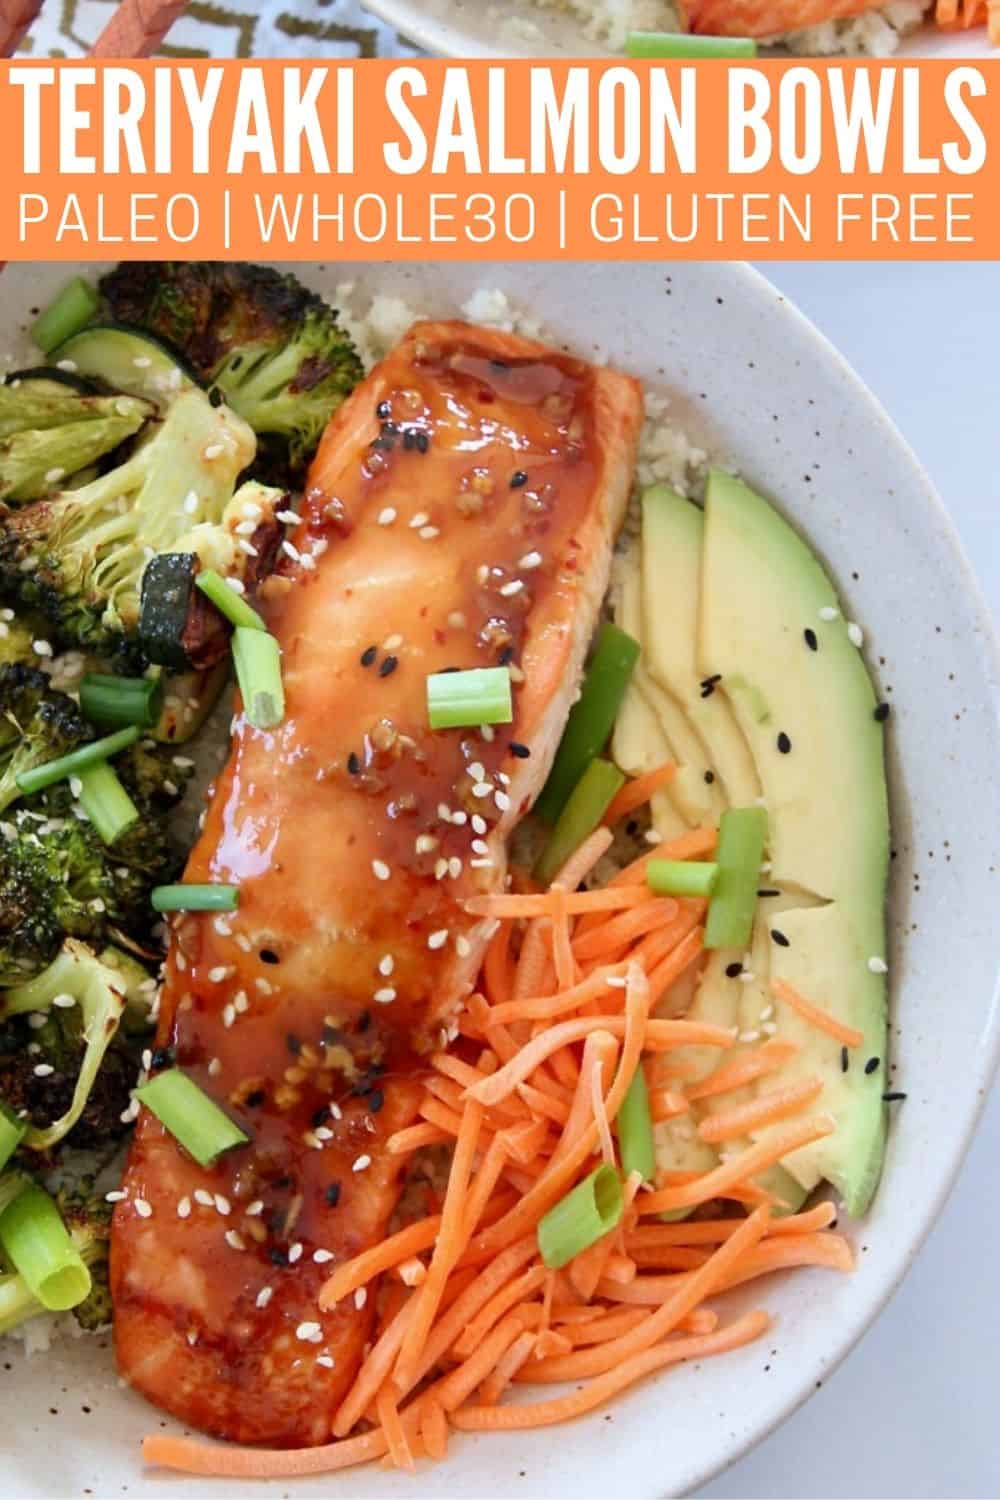 Whole30 Baked Teriyaki Salmon Bowl - Bowls Are The New Plates